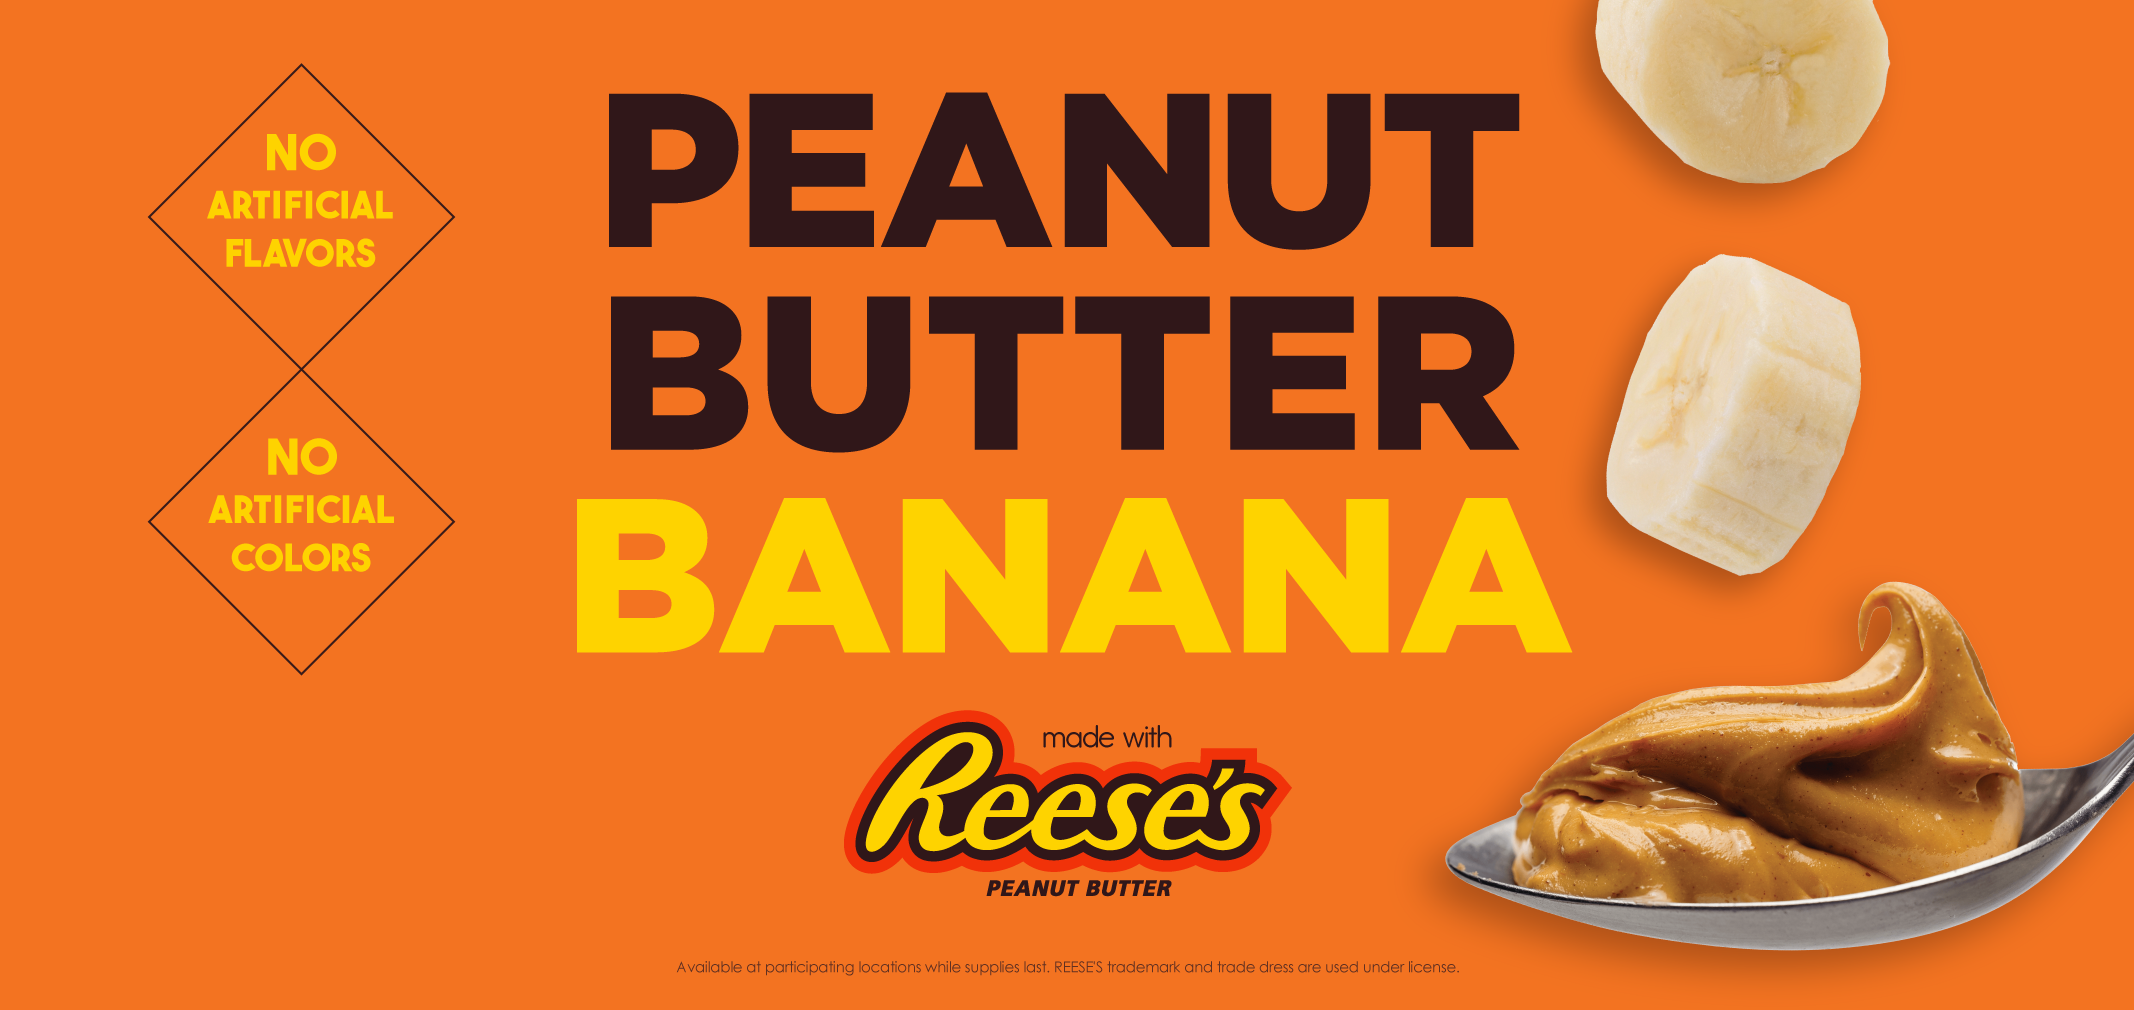 Peanut Butter Banana made with Reese's® Peanut Butter label image